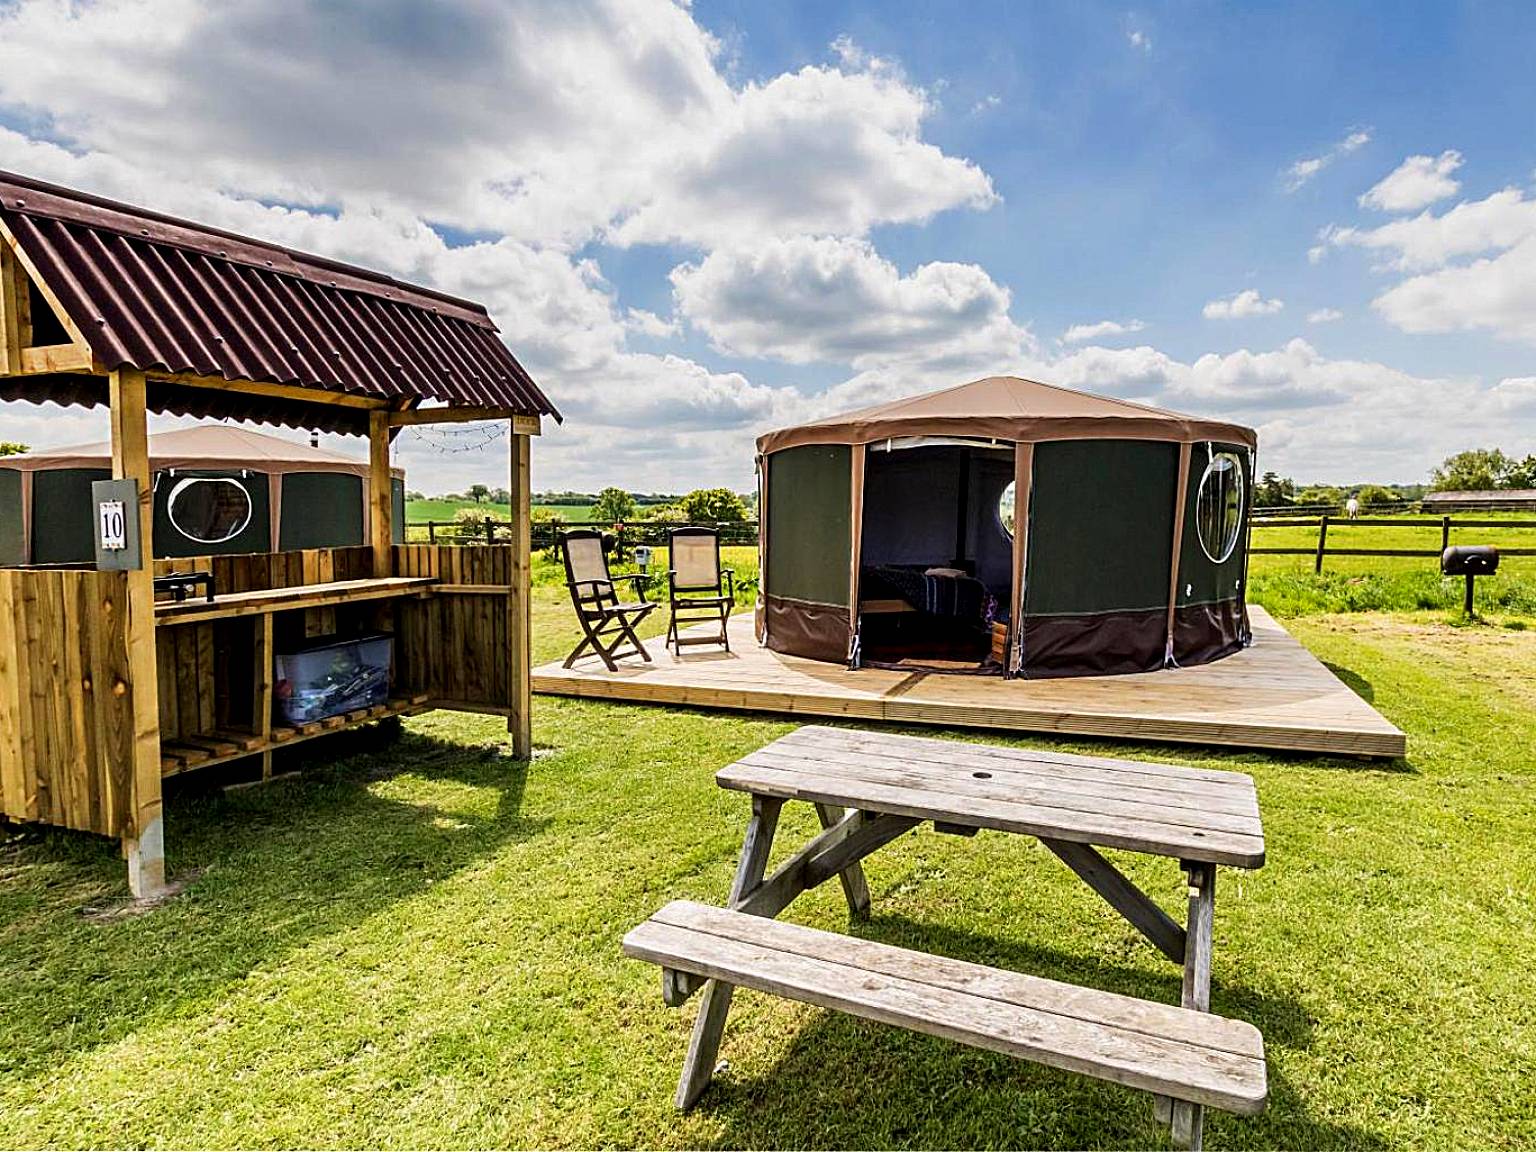 Mousley House Farm Campsite and Glamping